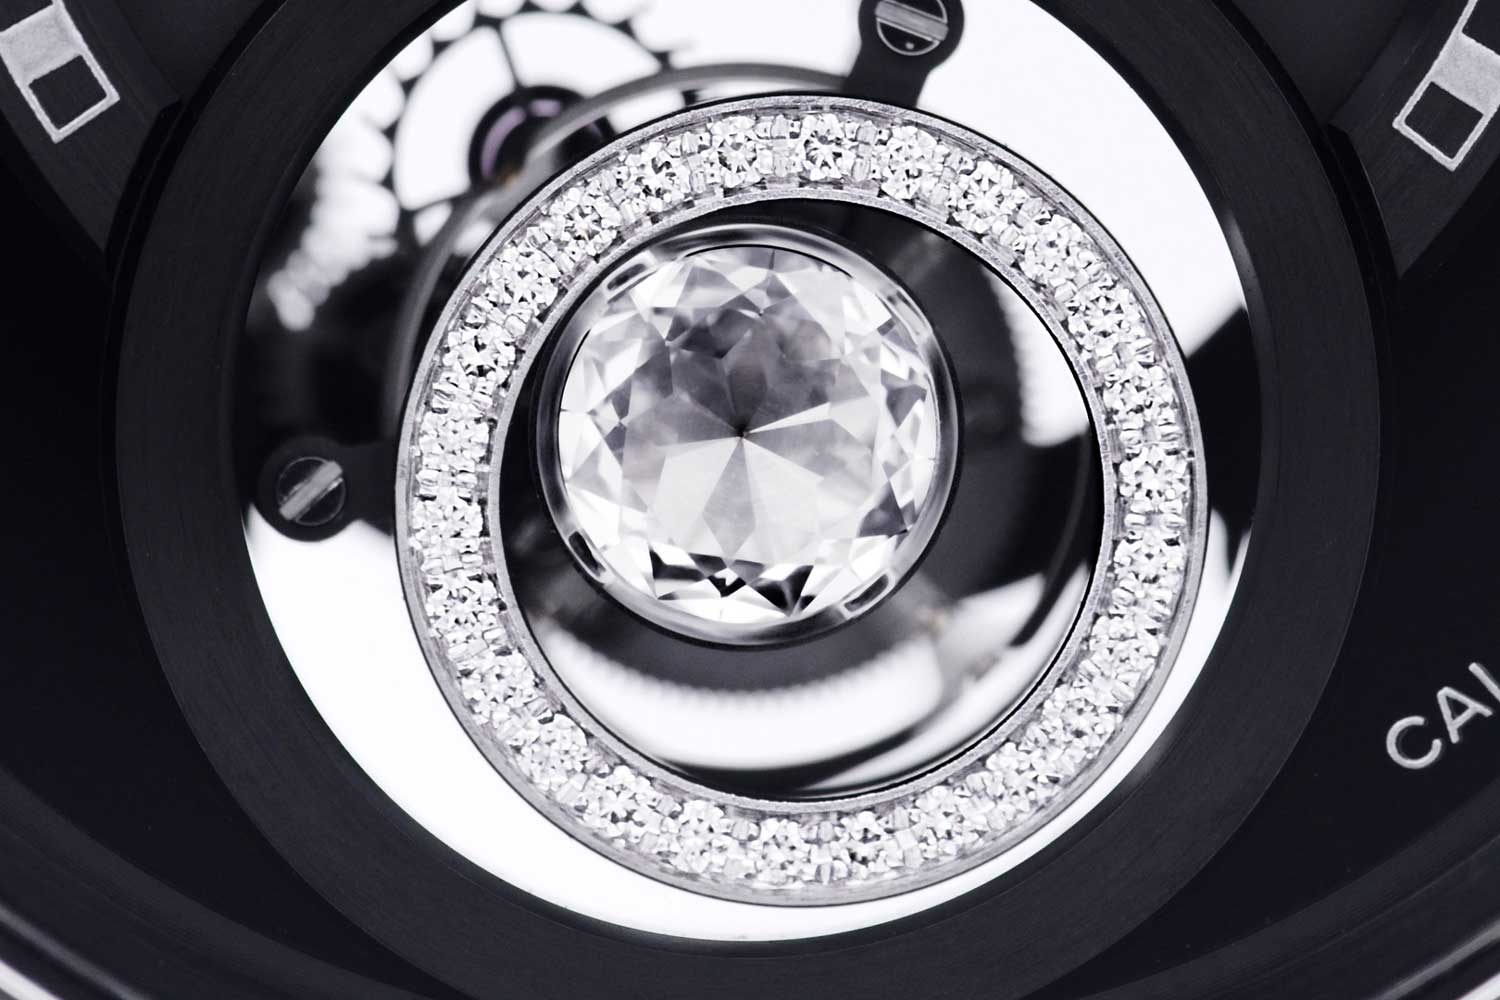 A 0.18-carat solitaire diamond with 65 facets is set at the center of the tourbillon cage that is framed by 26 round brilliant-cut diamonds